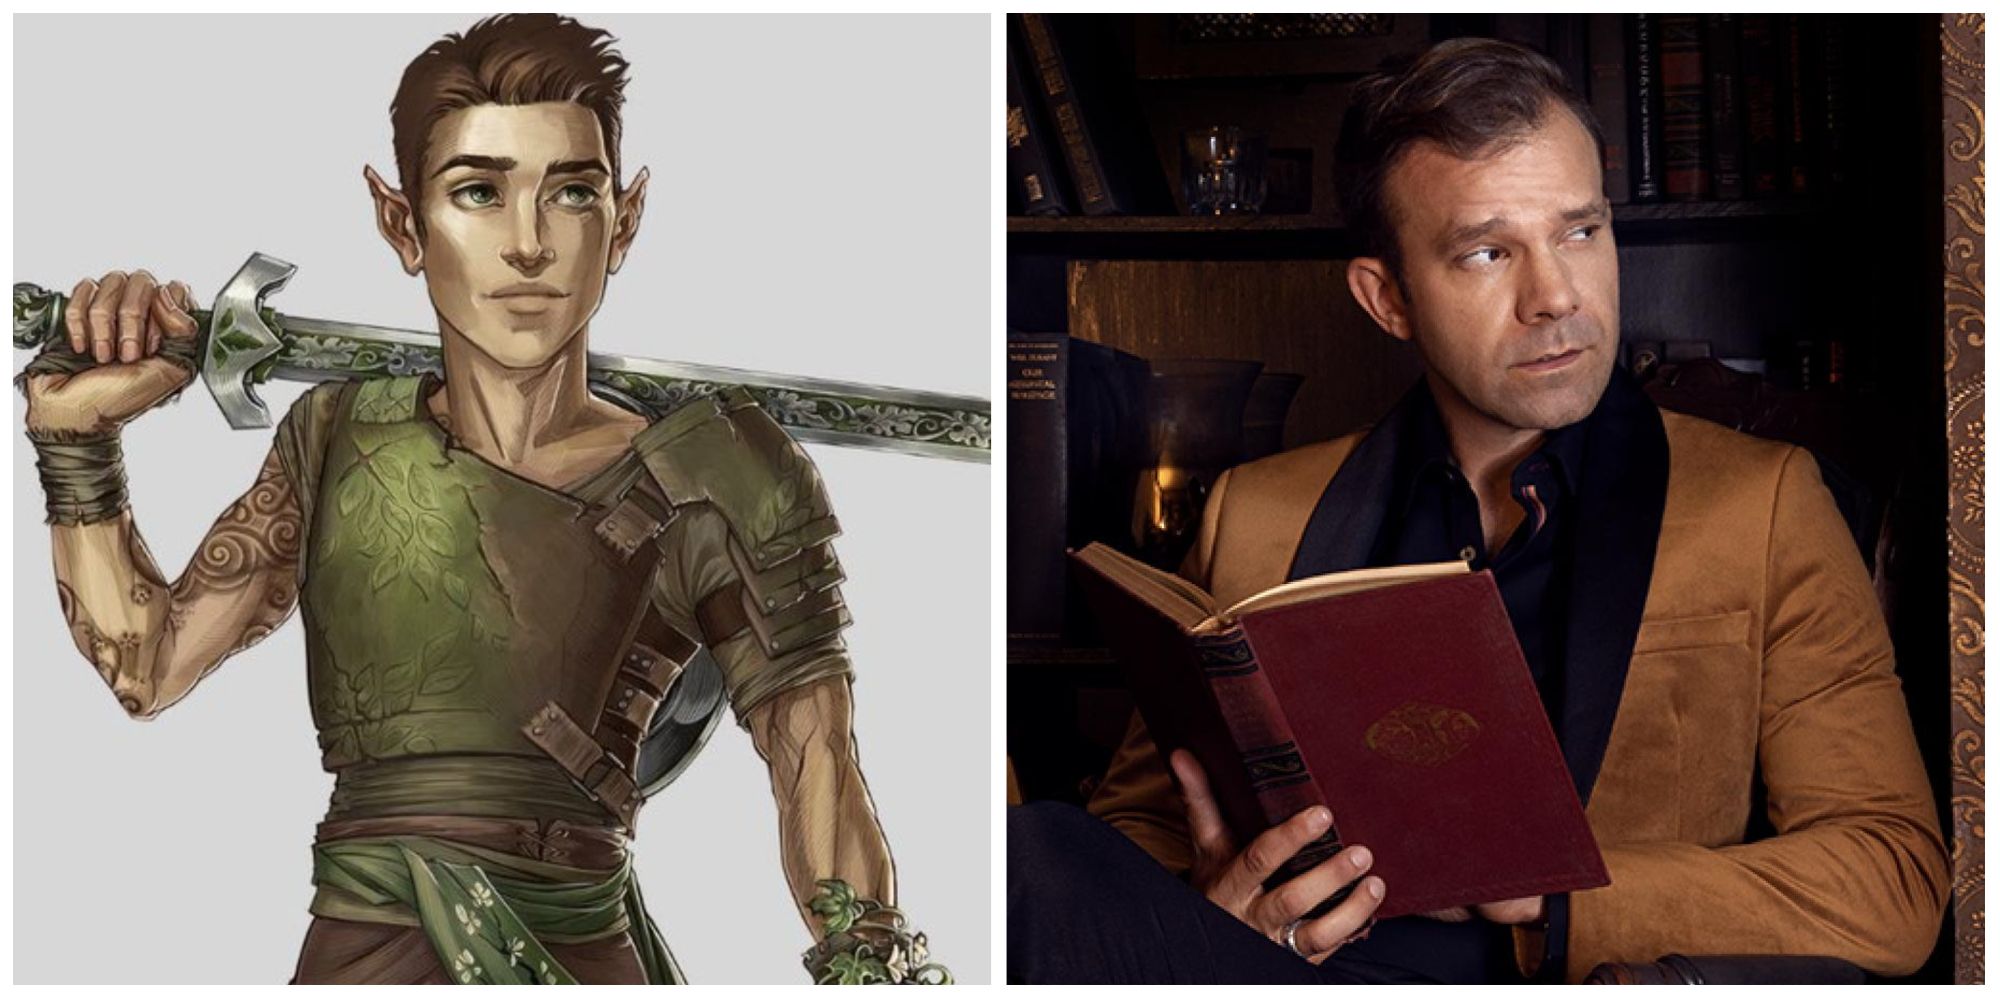 Orym of Critical Role on the left, Liam O'Brien on the right